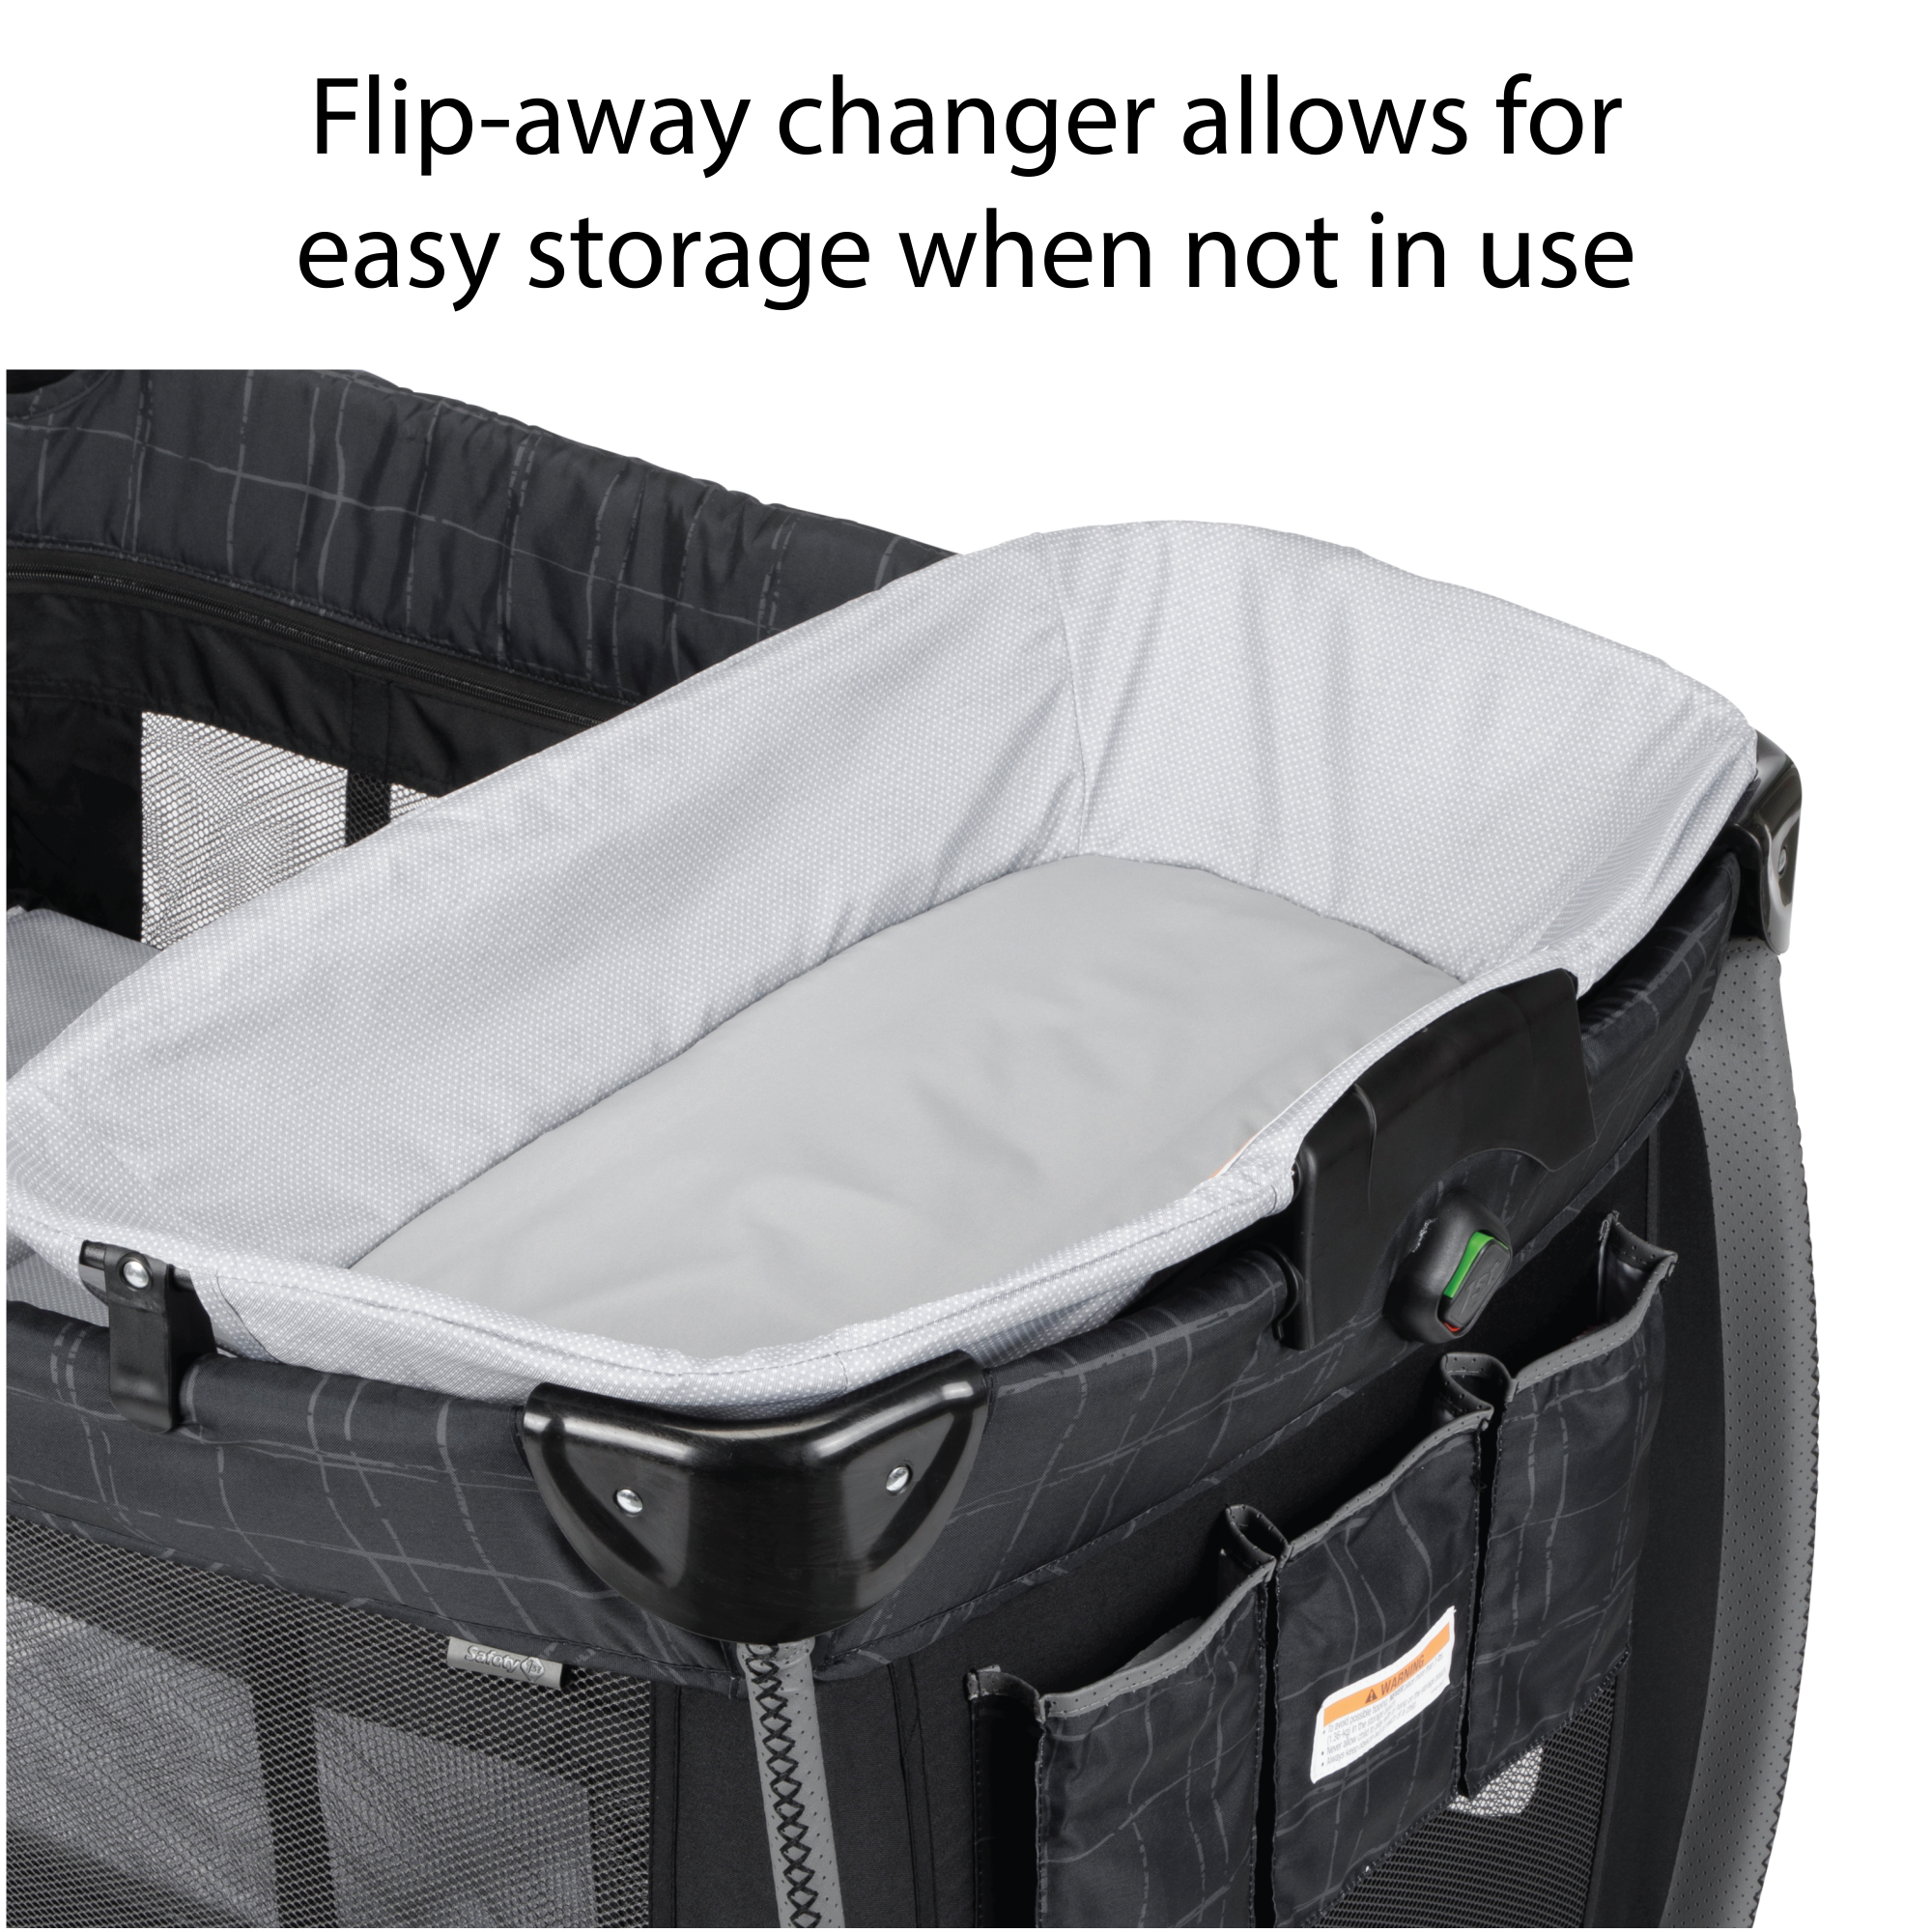 Play-and-Stay Play Yard - flip-away changer allows for easy storage when not in use